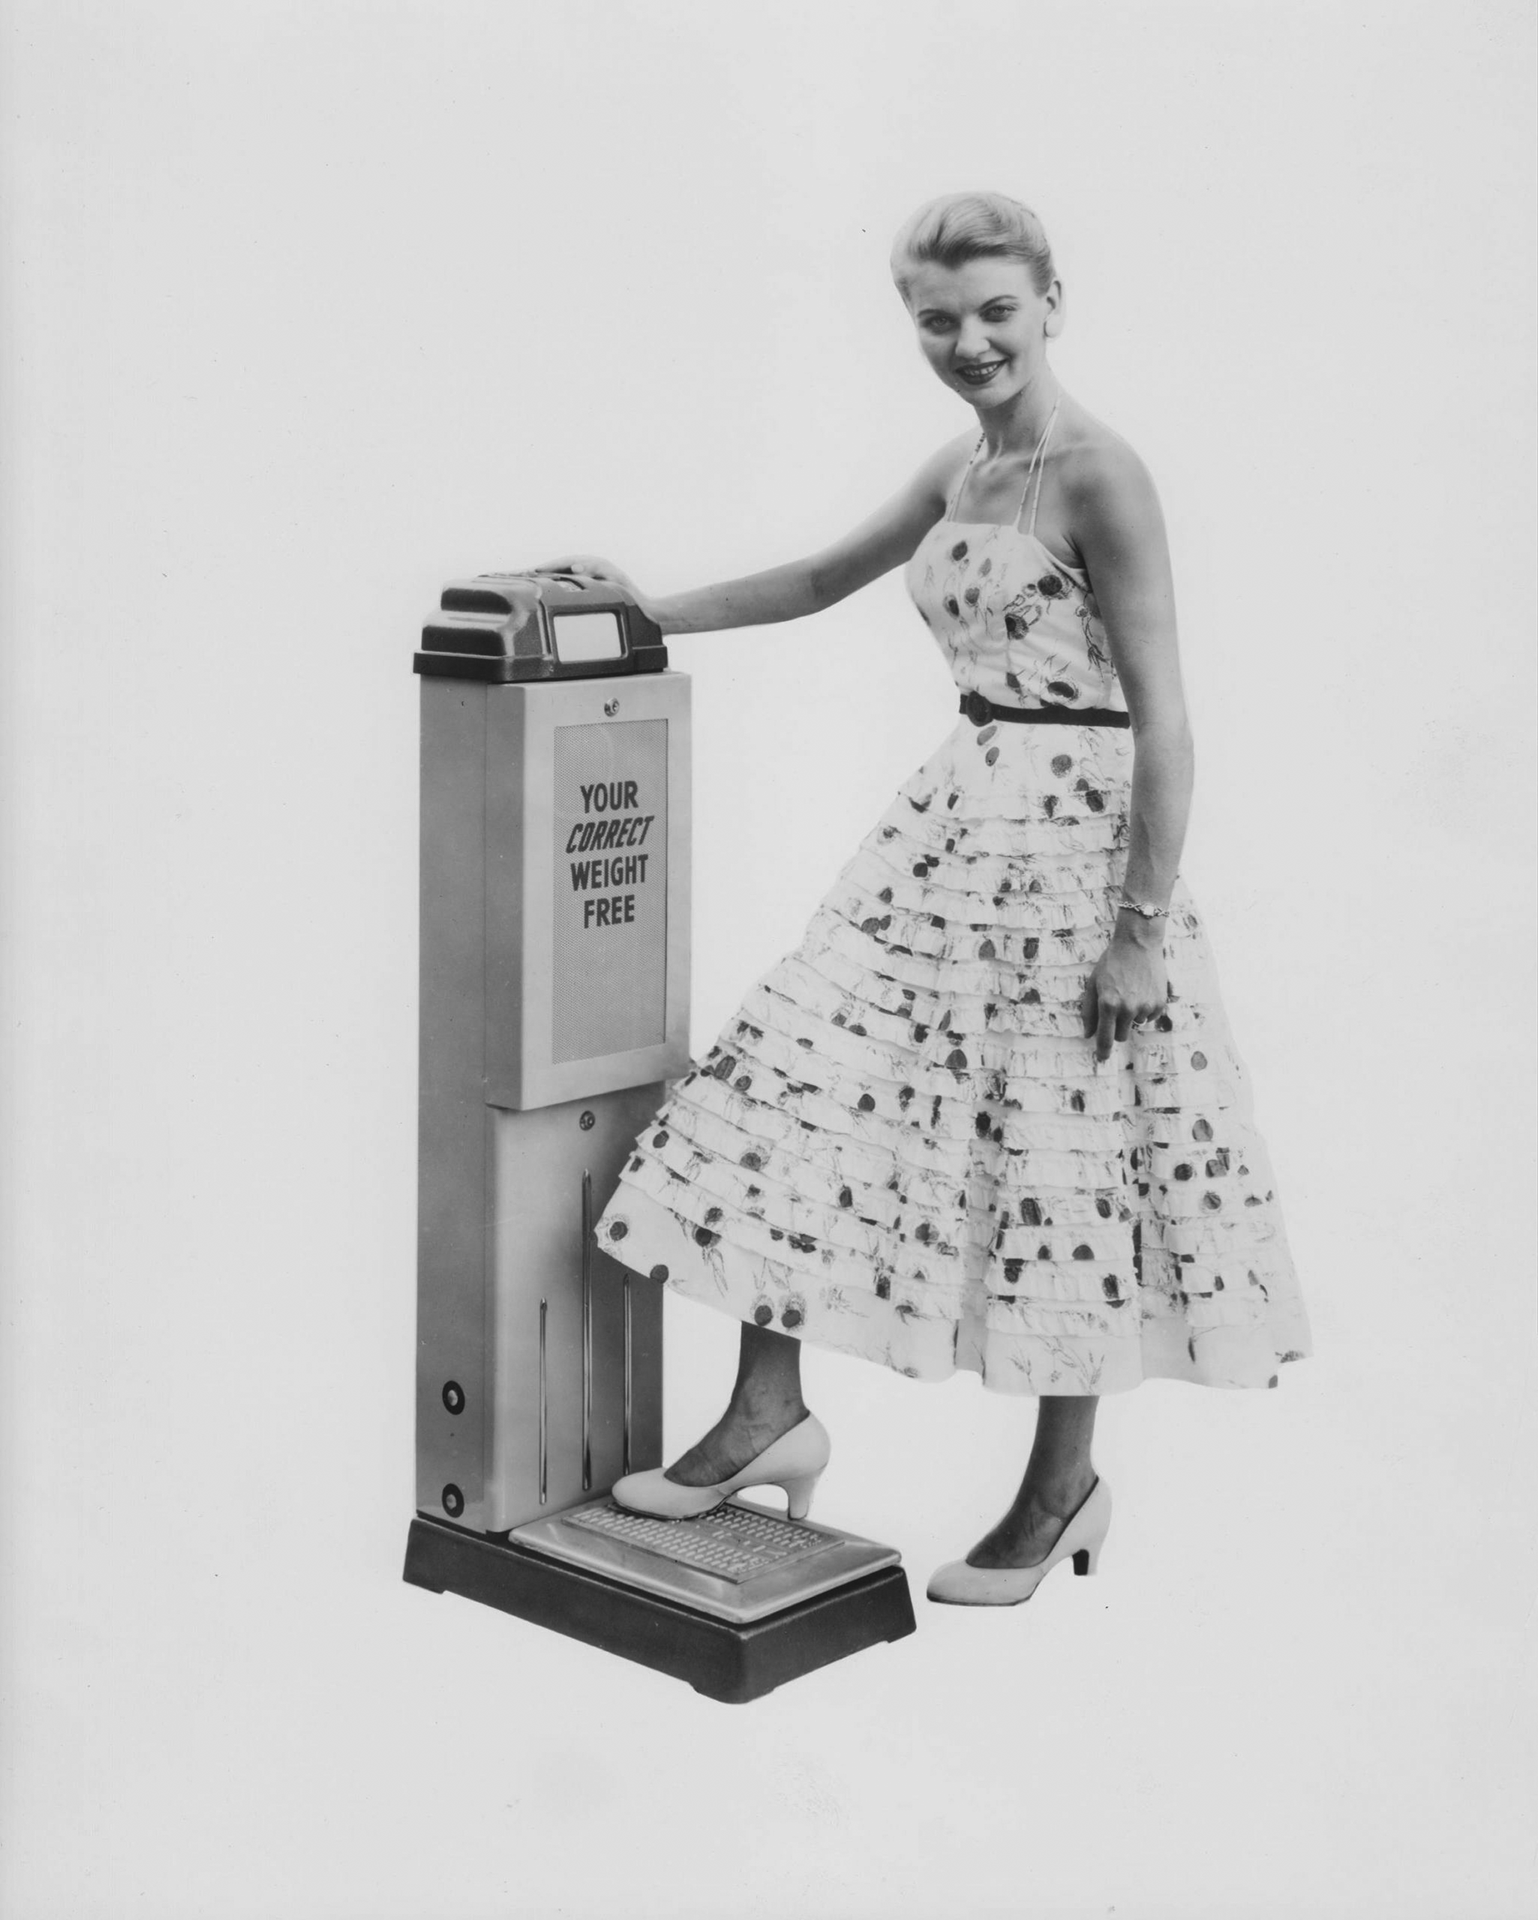 Old advertising image of a woman standing on a scale